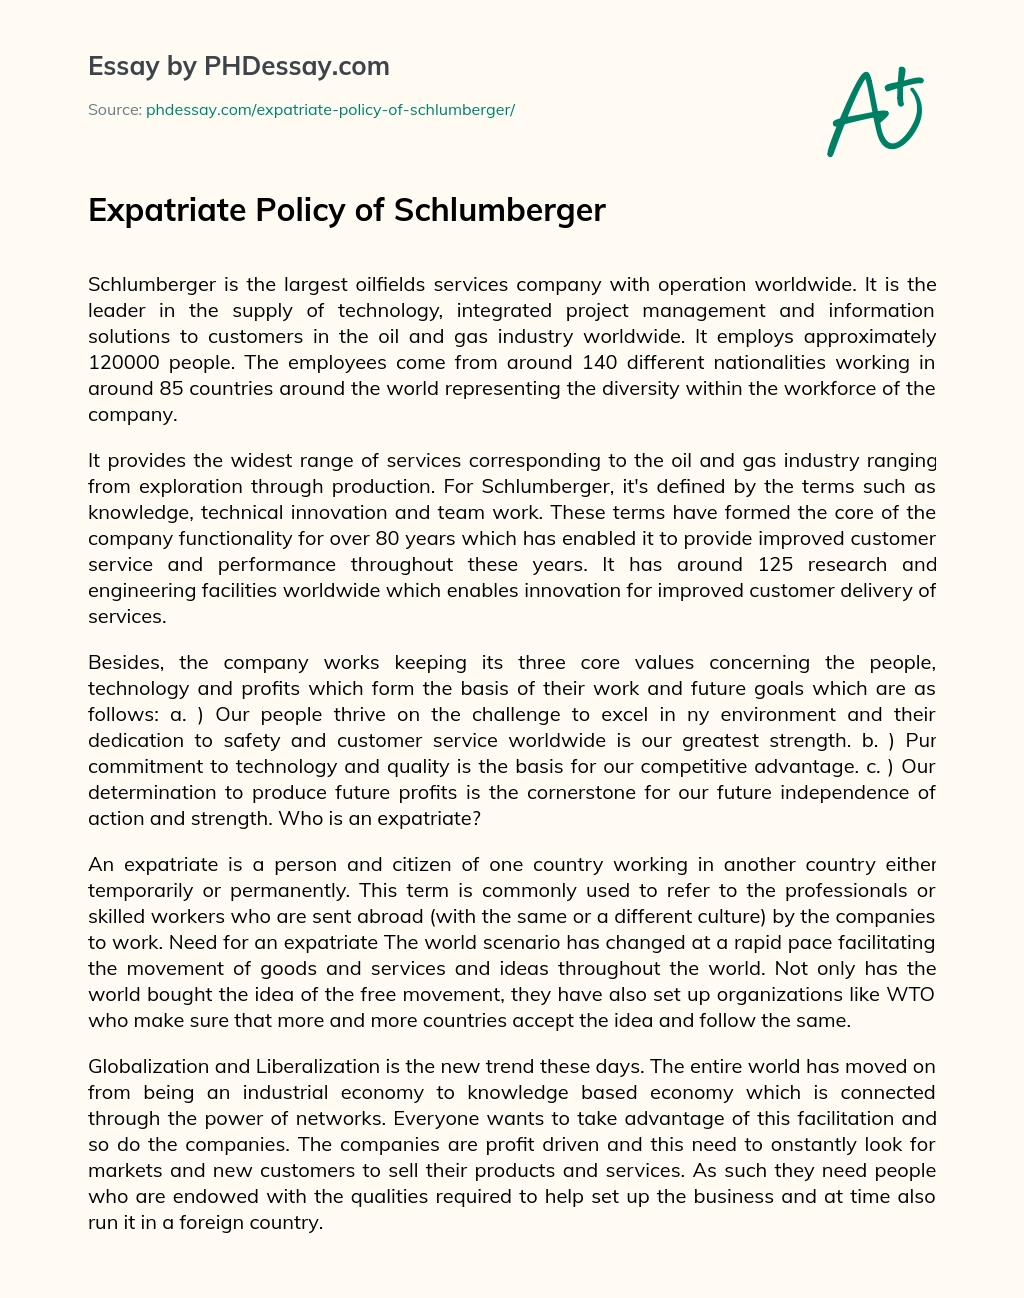 Expatriate Policy of Schlumberger essay